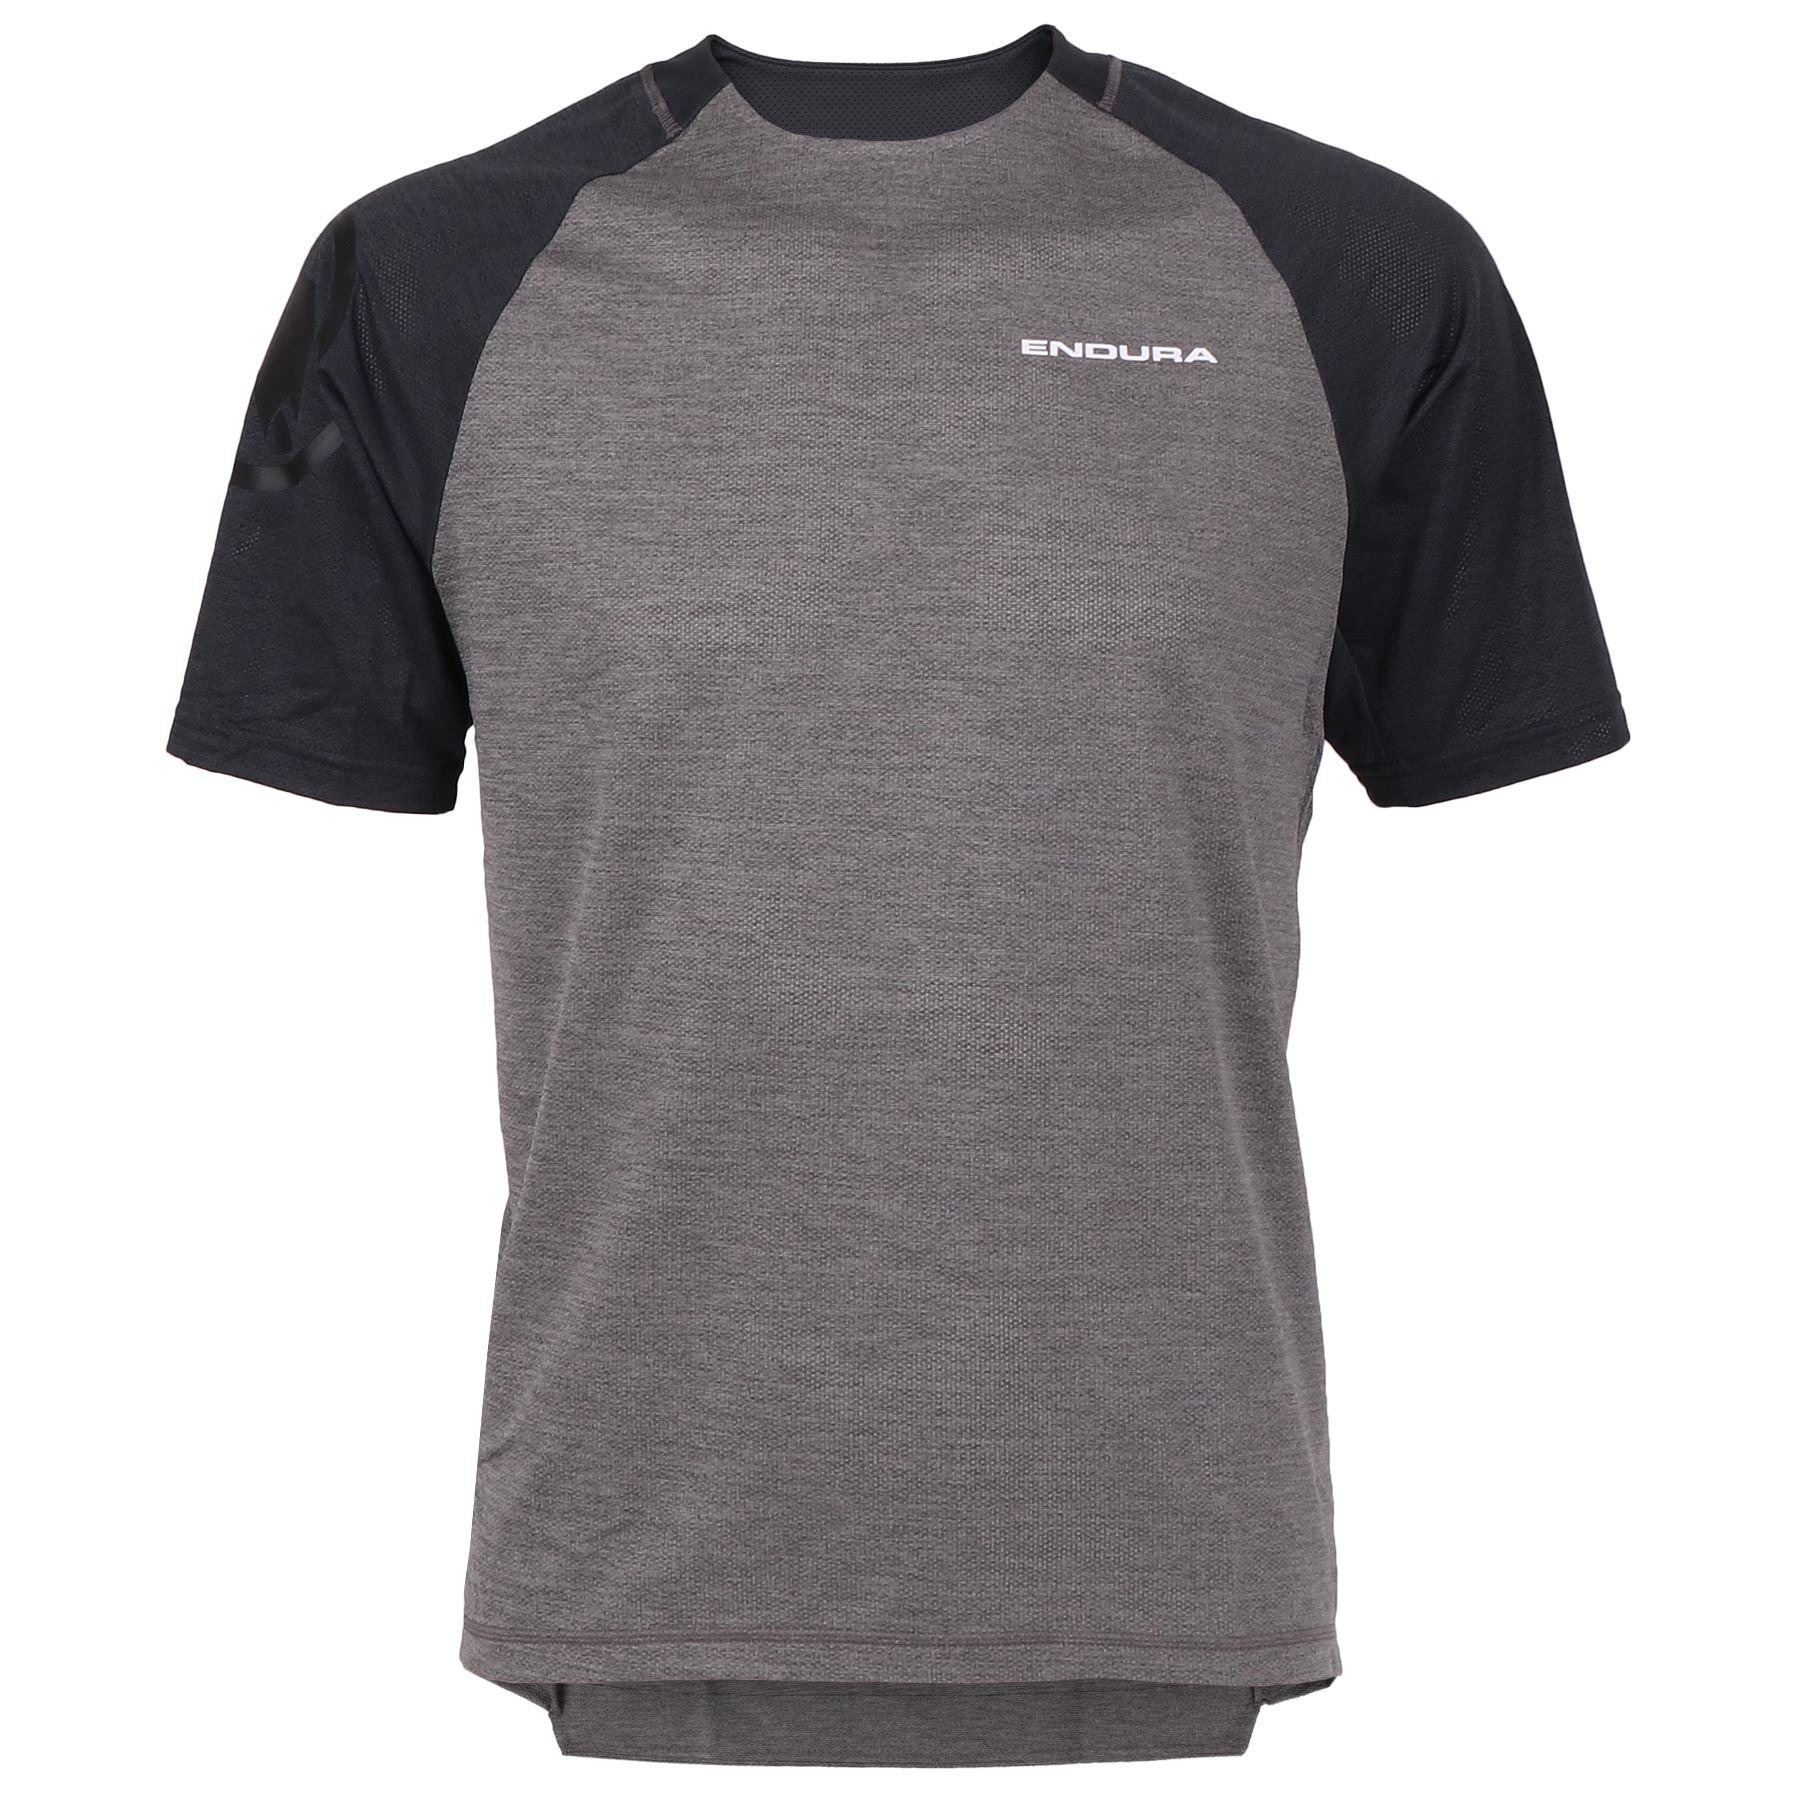 Picture of Endura SingleTrack Short Sleeve Jersey - pewter grey